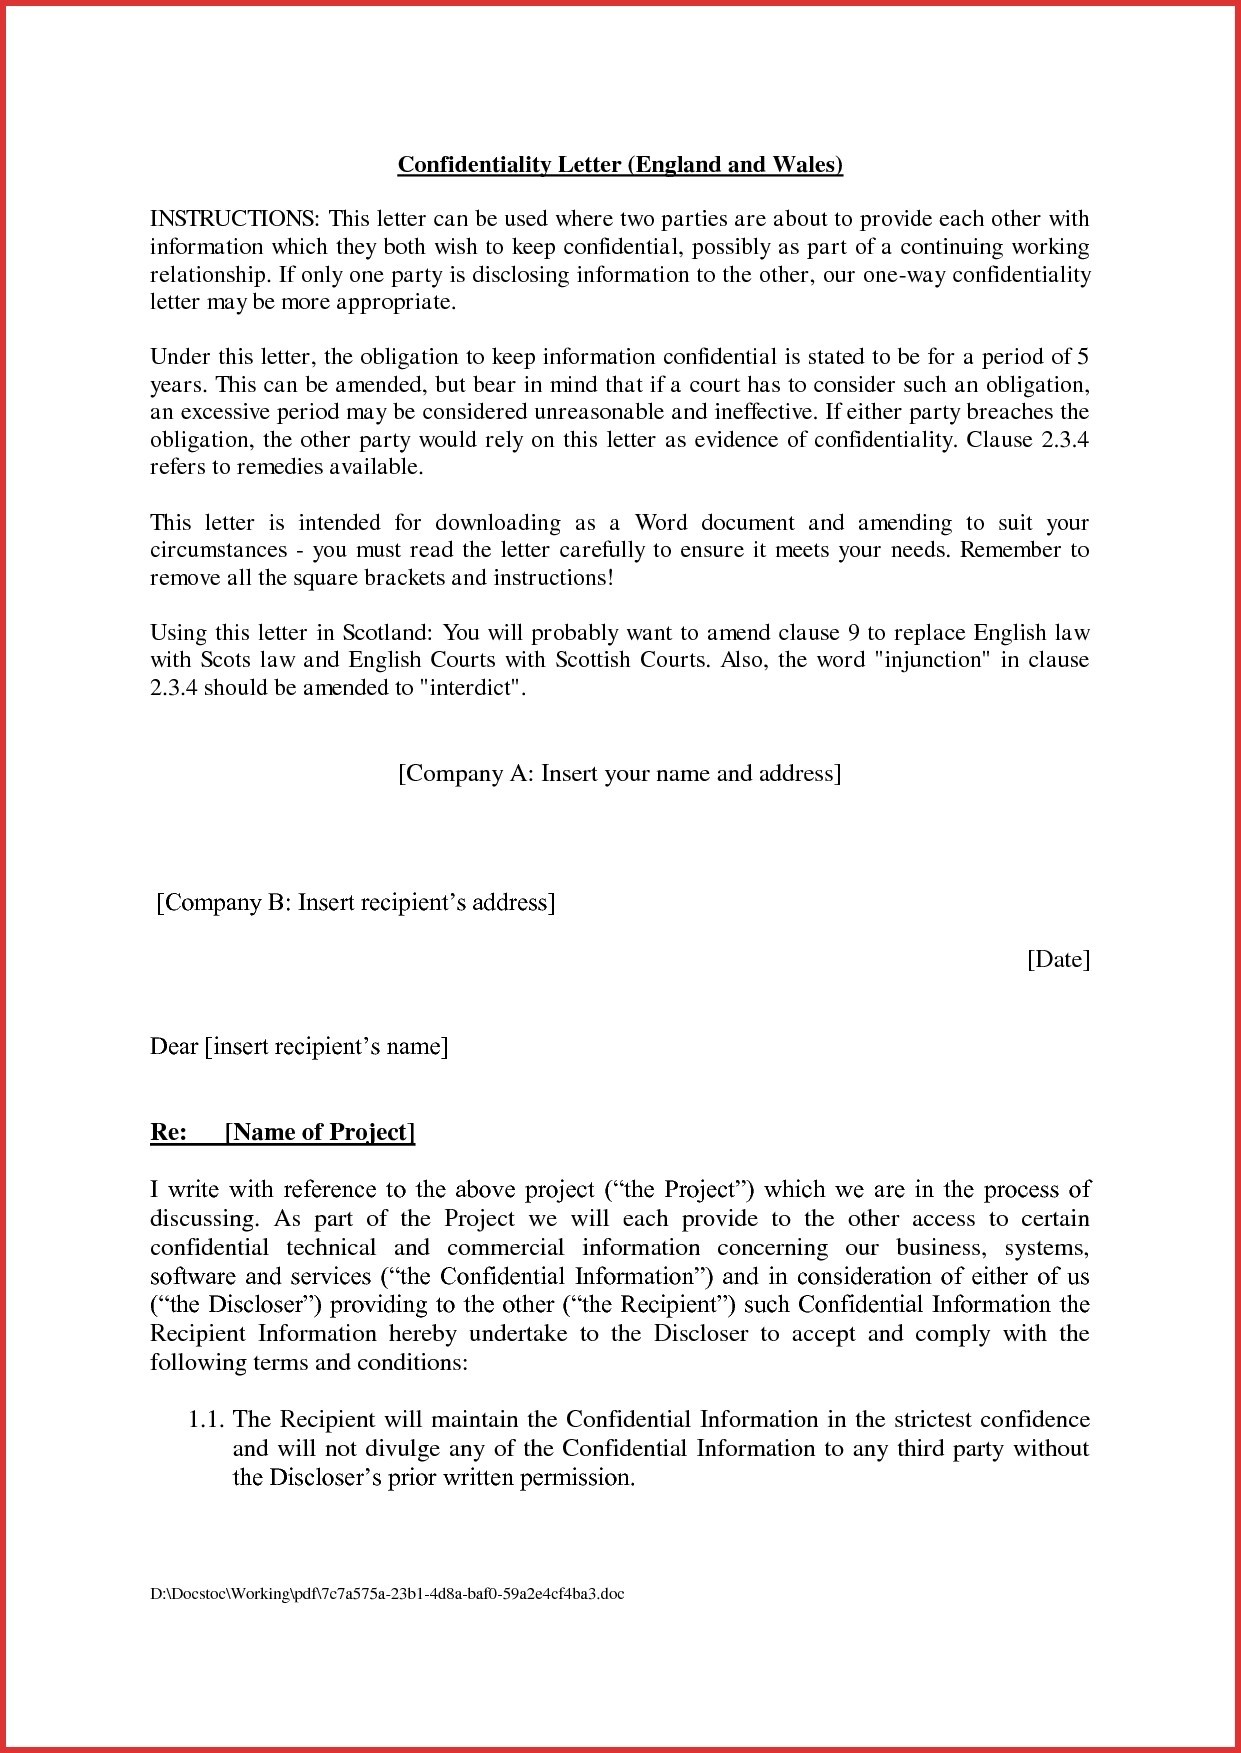 Agreement Letter Between Two Parties Brave100818 Com Document How To Write An